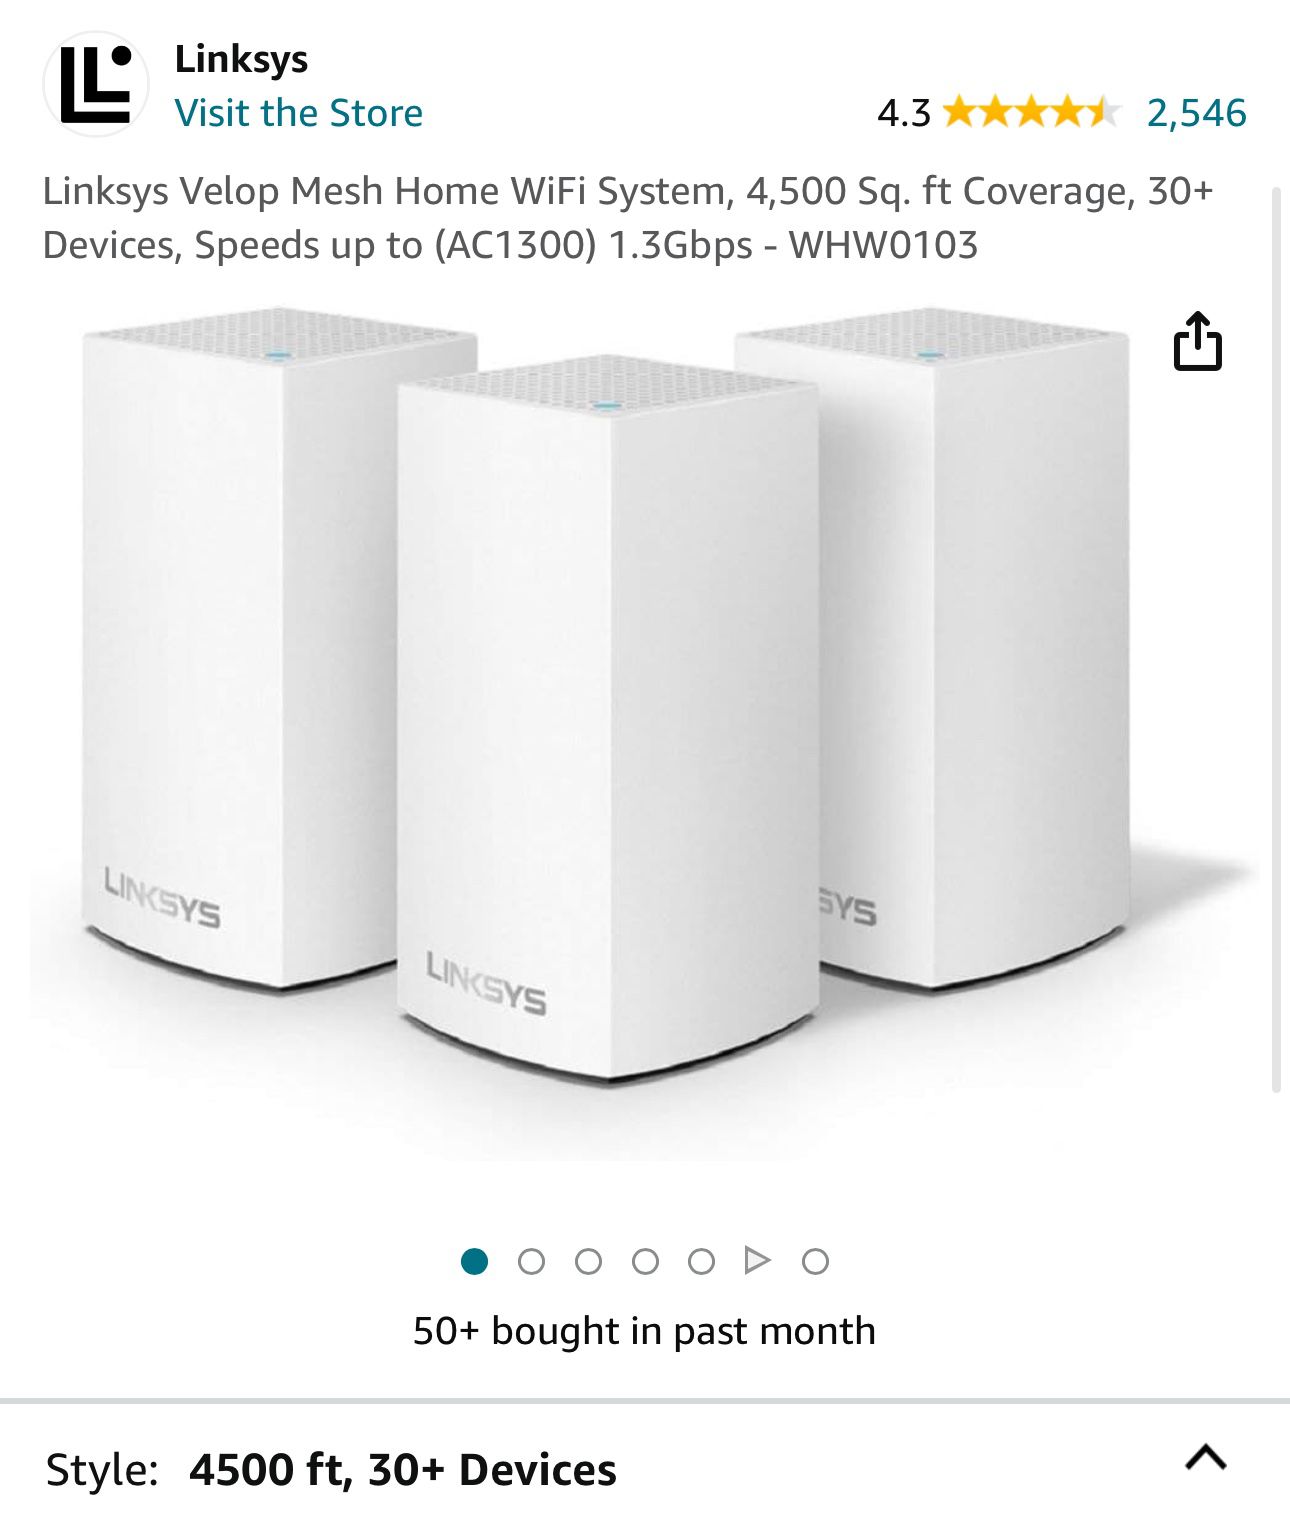 Linksys Velop Mesh Home WiFi System, 4,500 Sq. ft Coverage